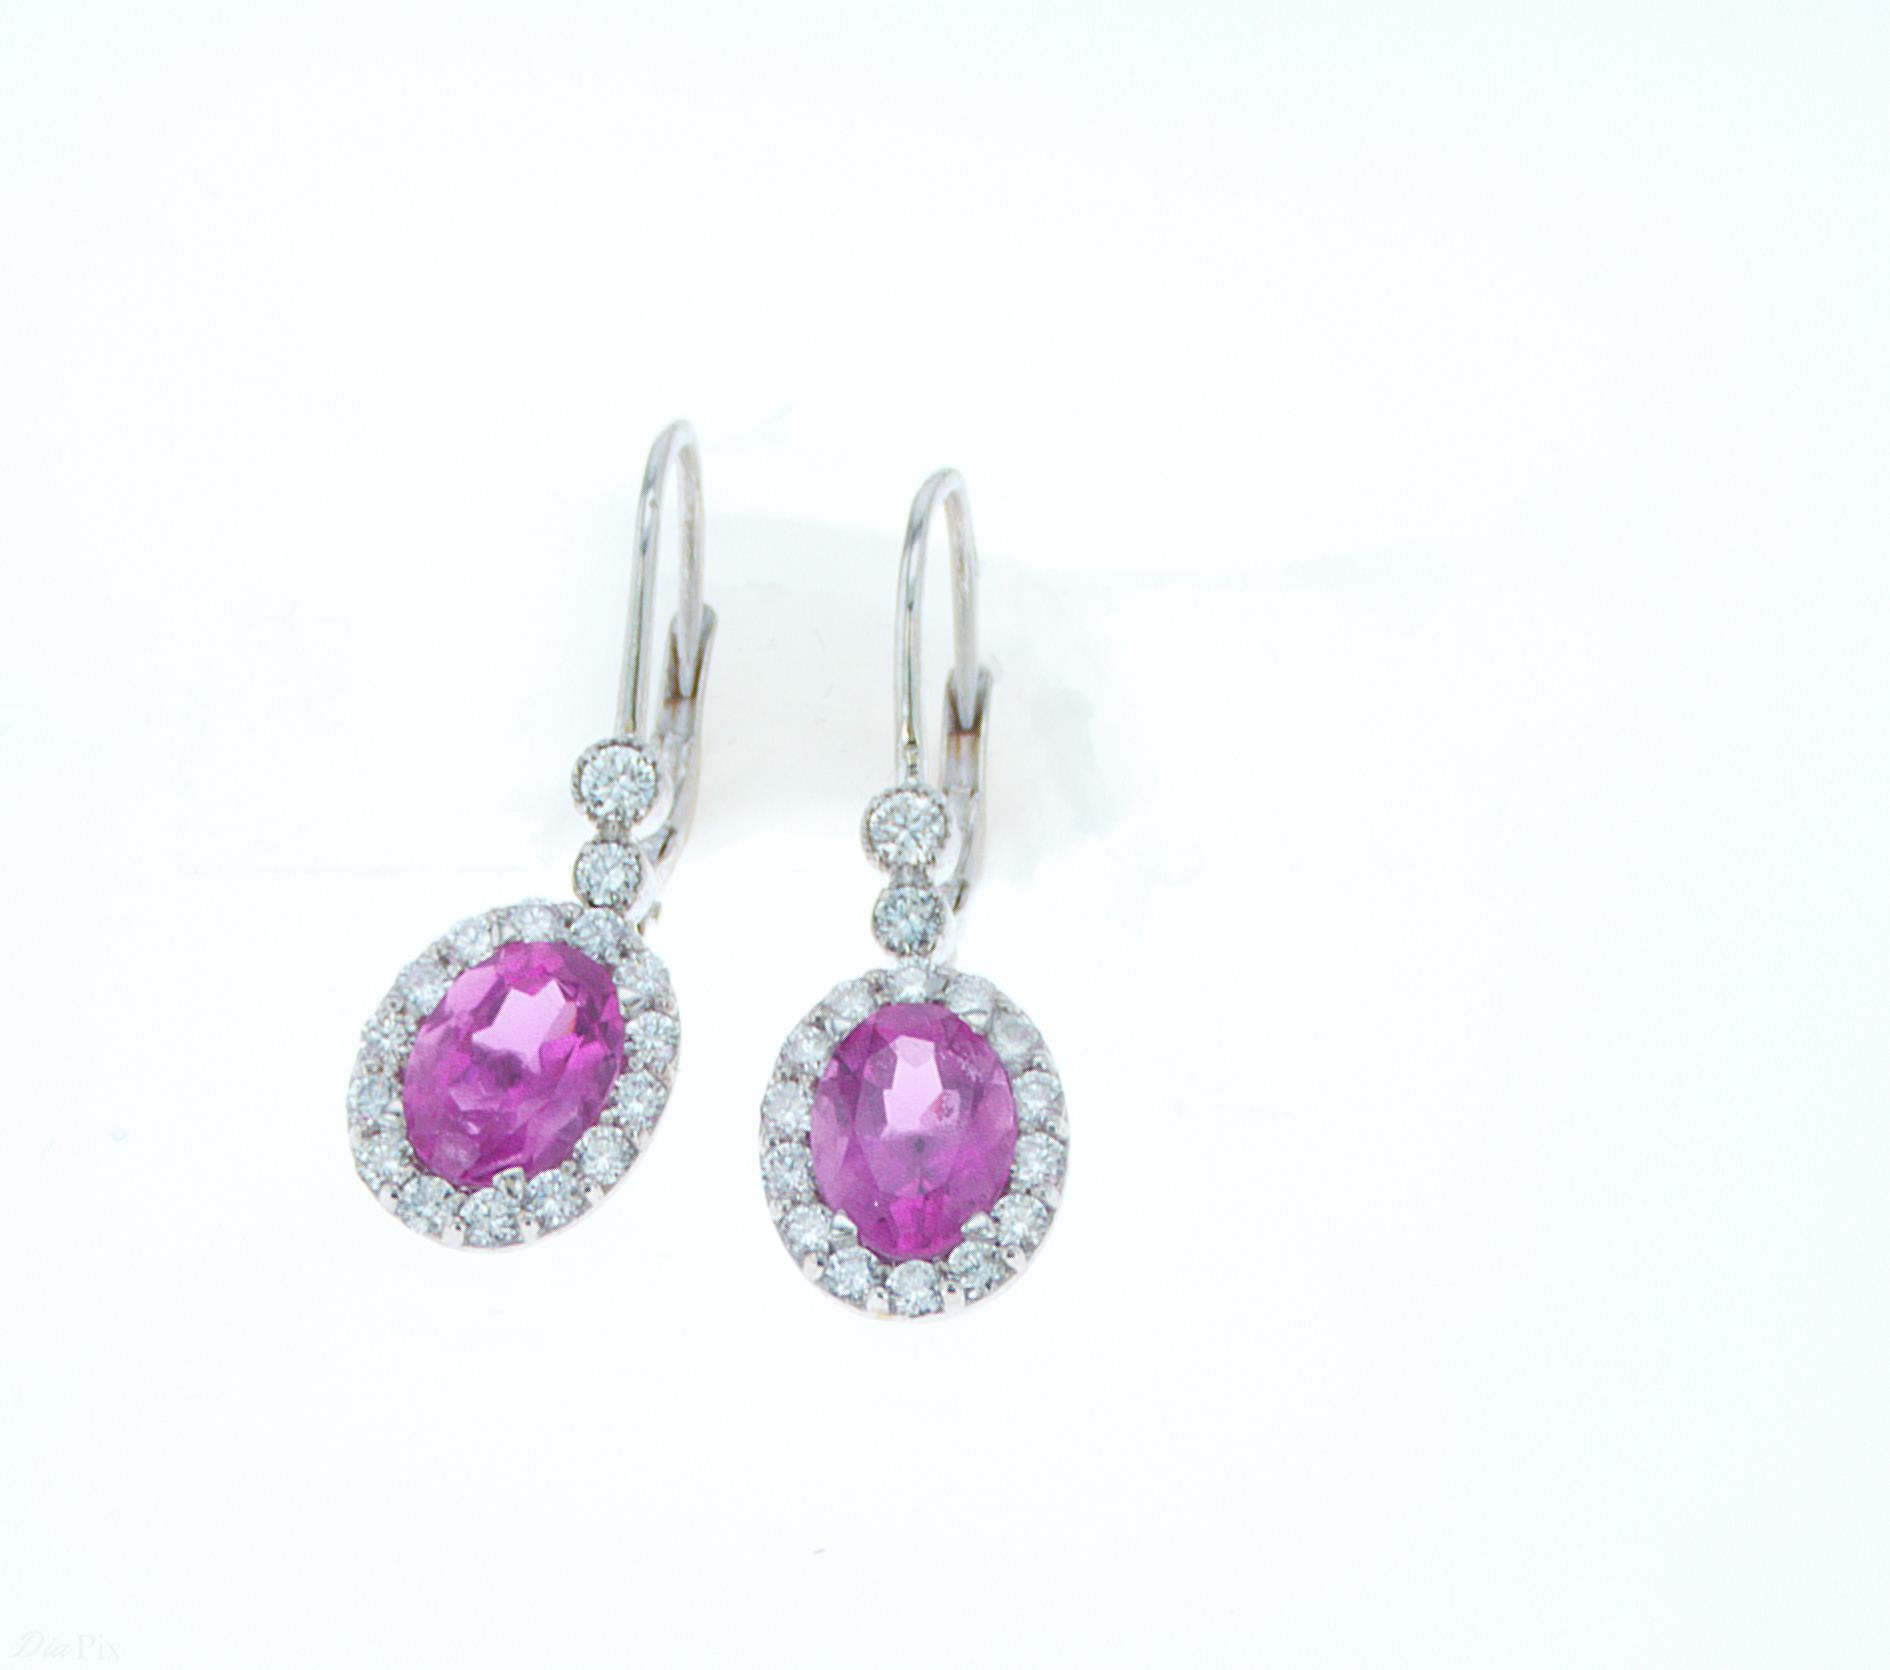 2.59 Carat TW Pink Tourmaline Earrings with Diamond Borders In New Condition For Sale In New York, NY